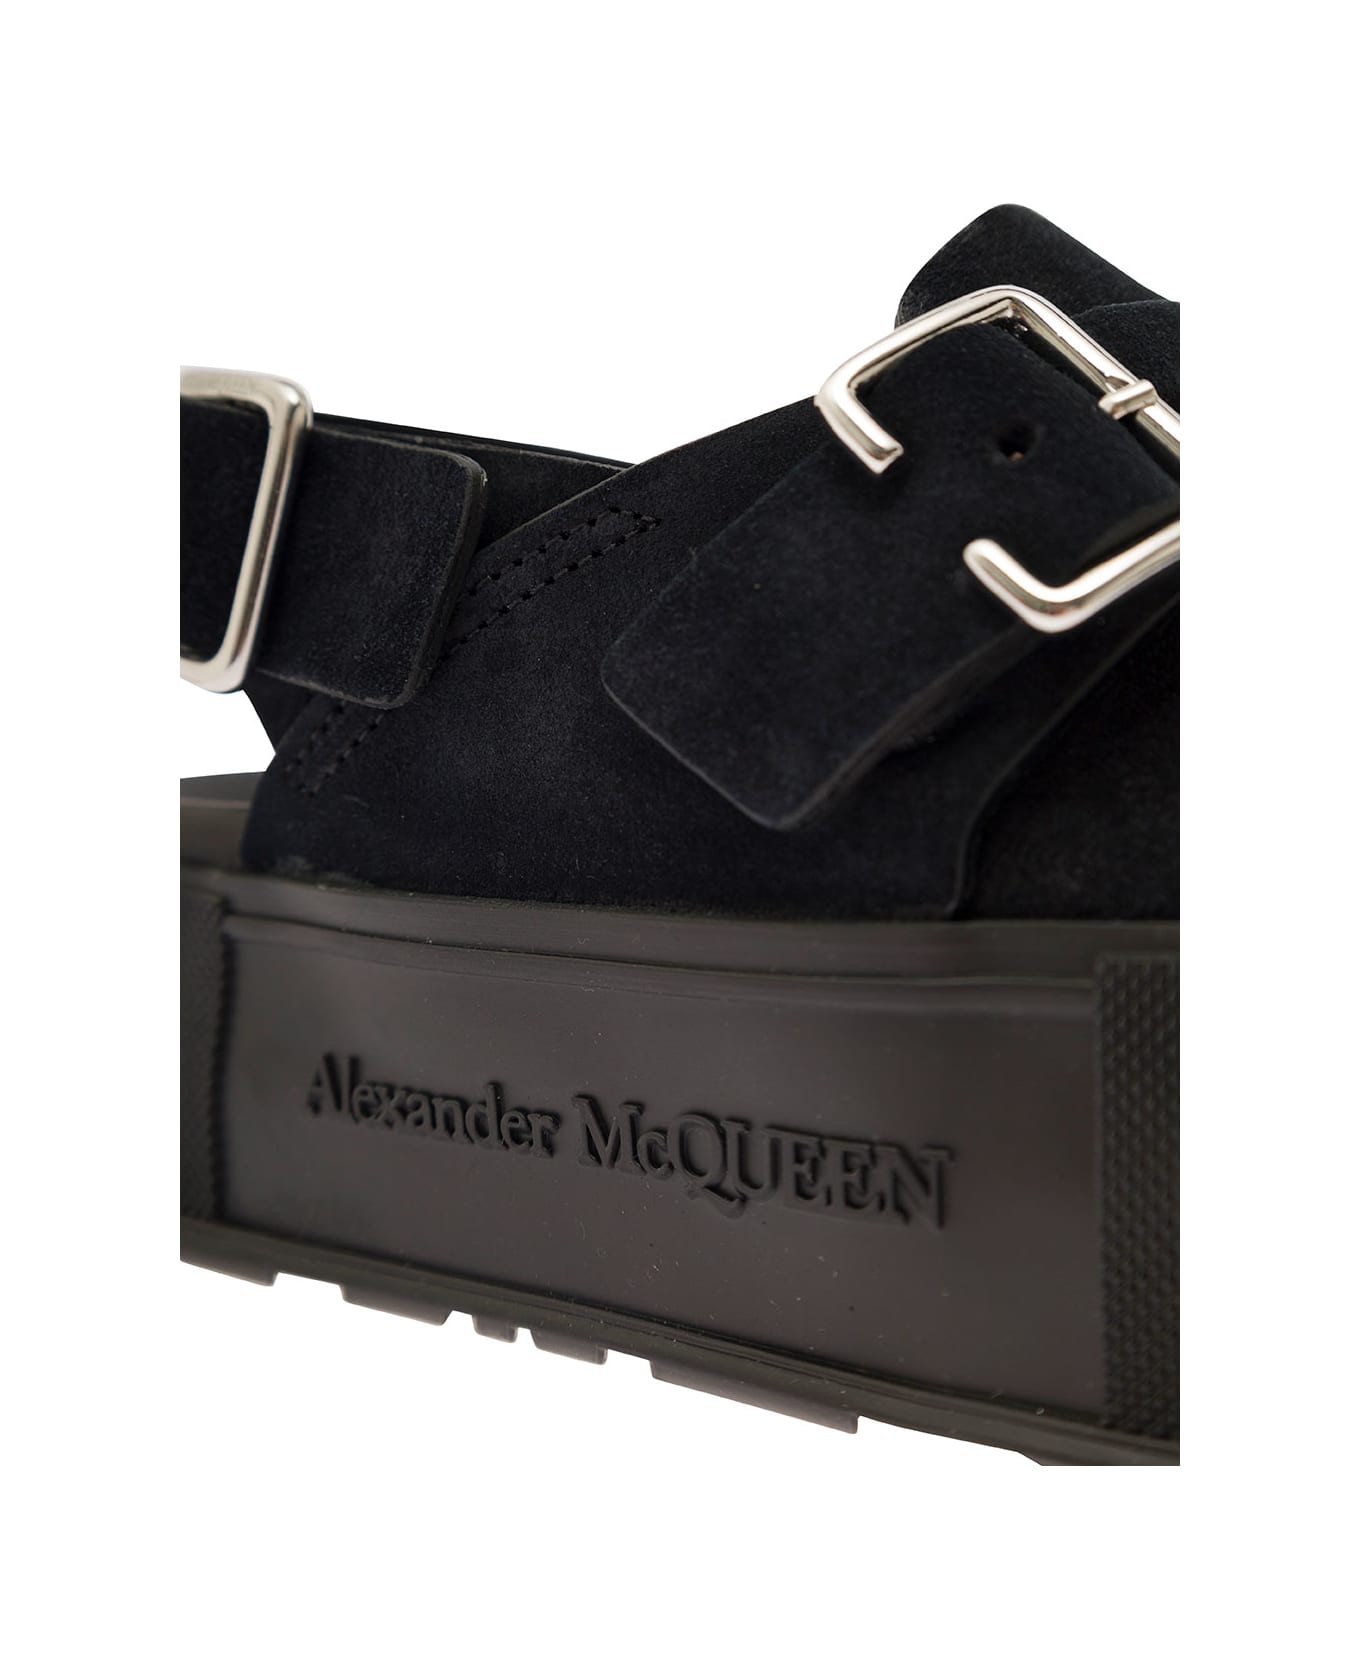 Alexander McQueen 'mount Slick' Black Close-toe Sandals With Platform And Logo Engraved In Leather Man - Black その他各種シューズ